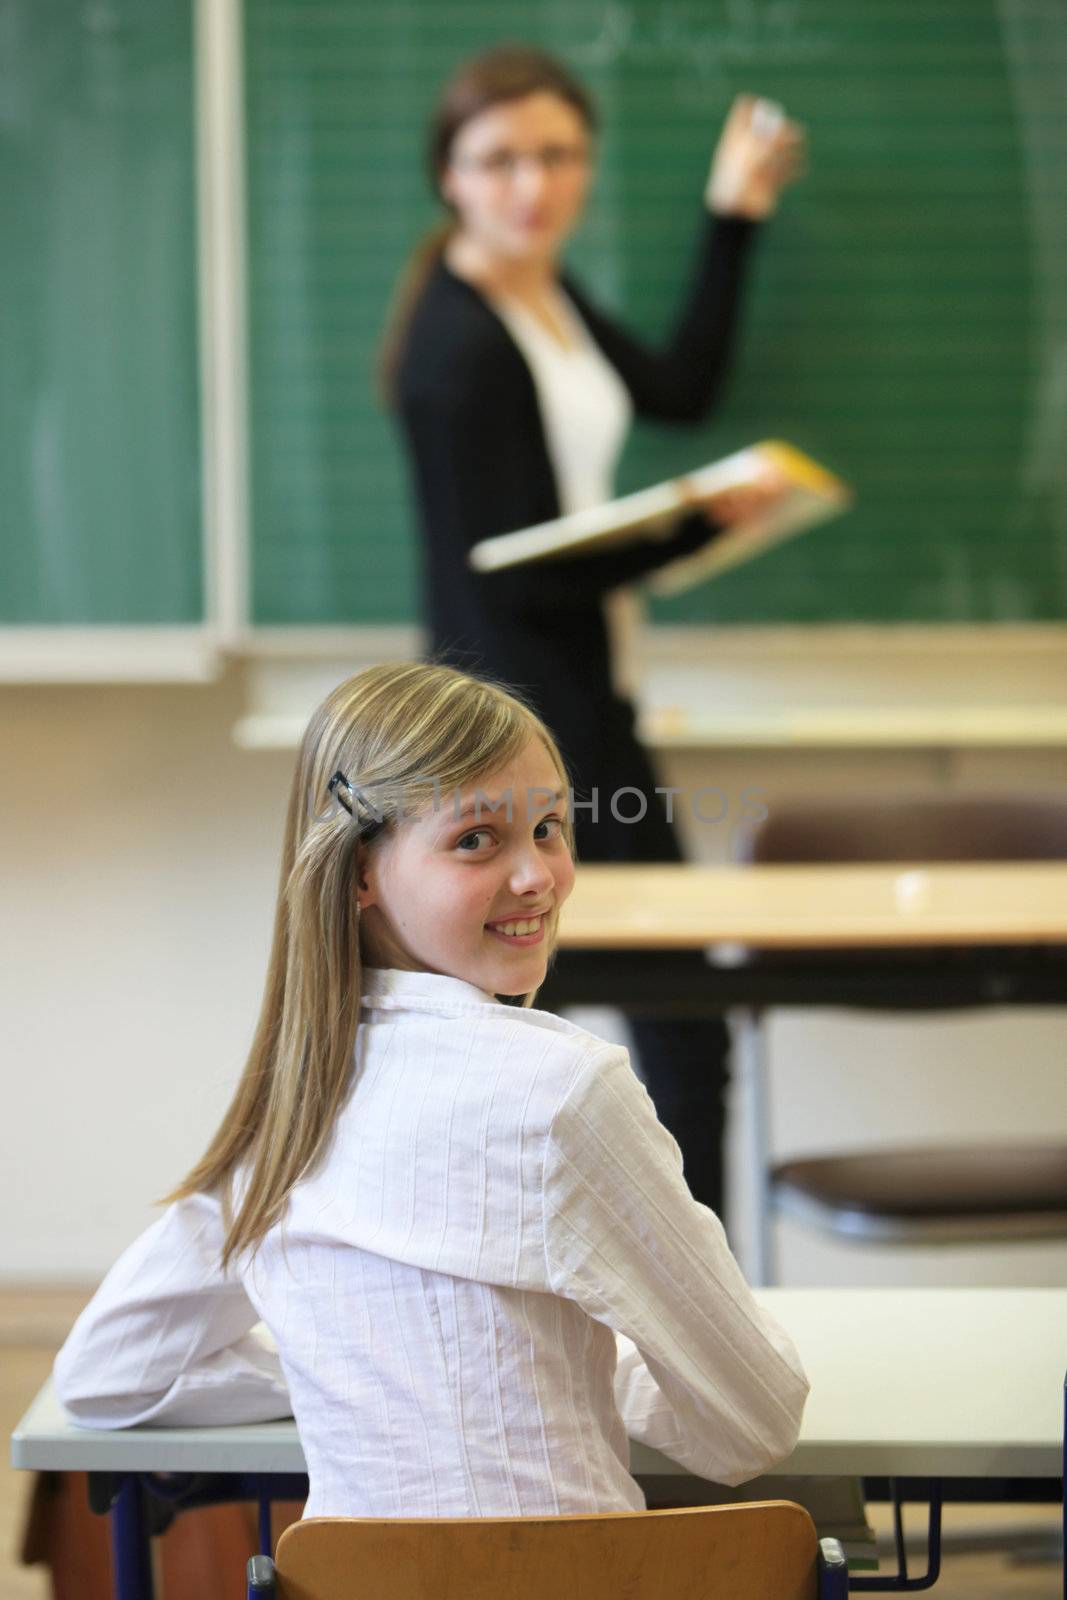 School child with a teacher in the classroom. The student turns around and smiles